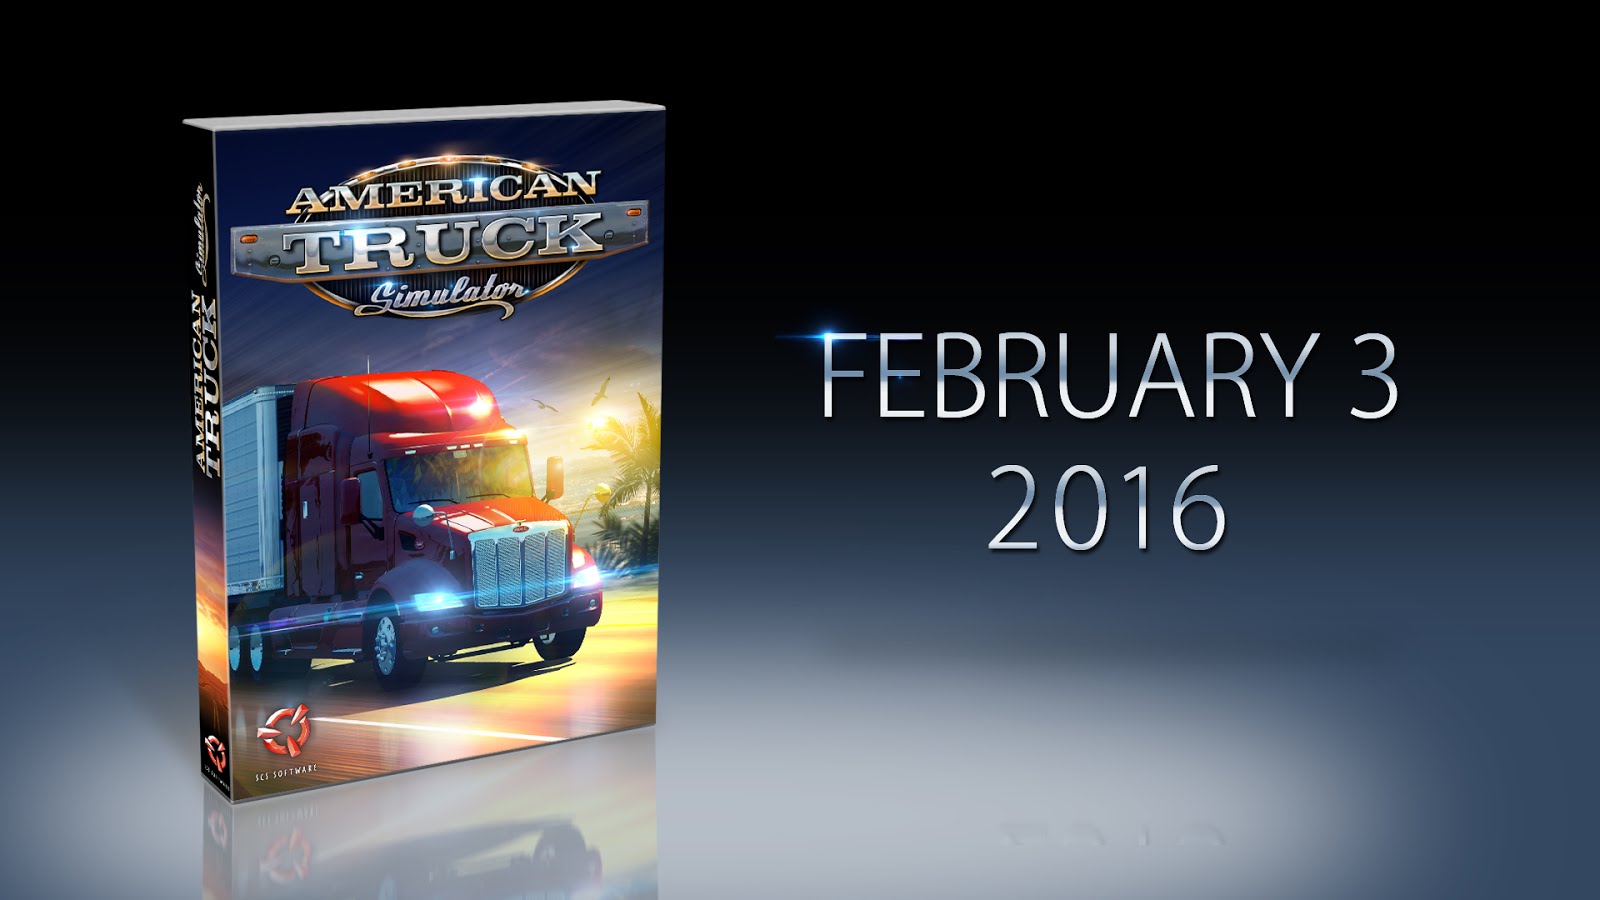 An Official American Truck Simulator Release Date